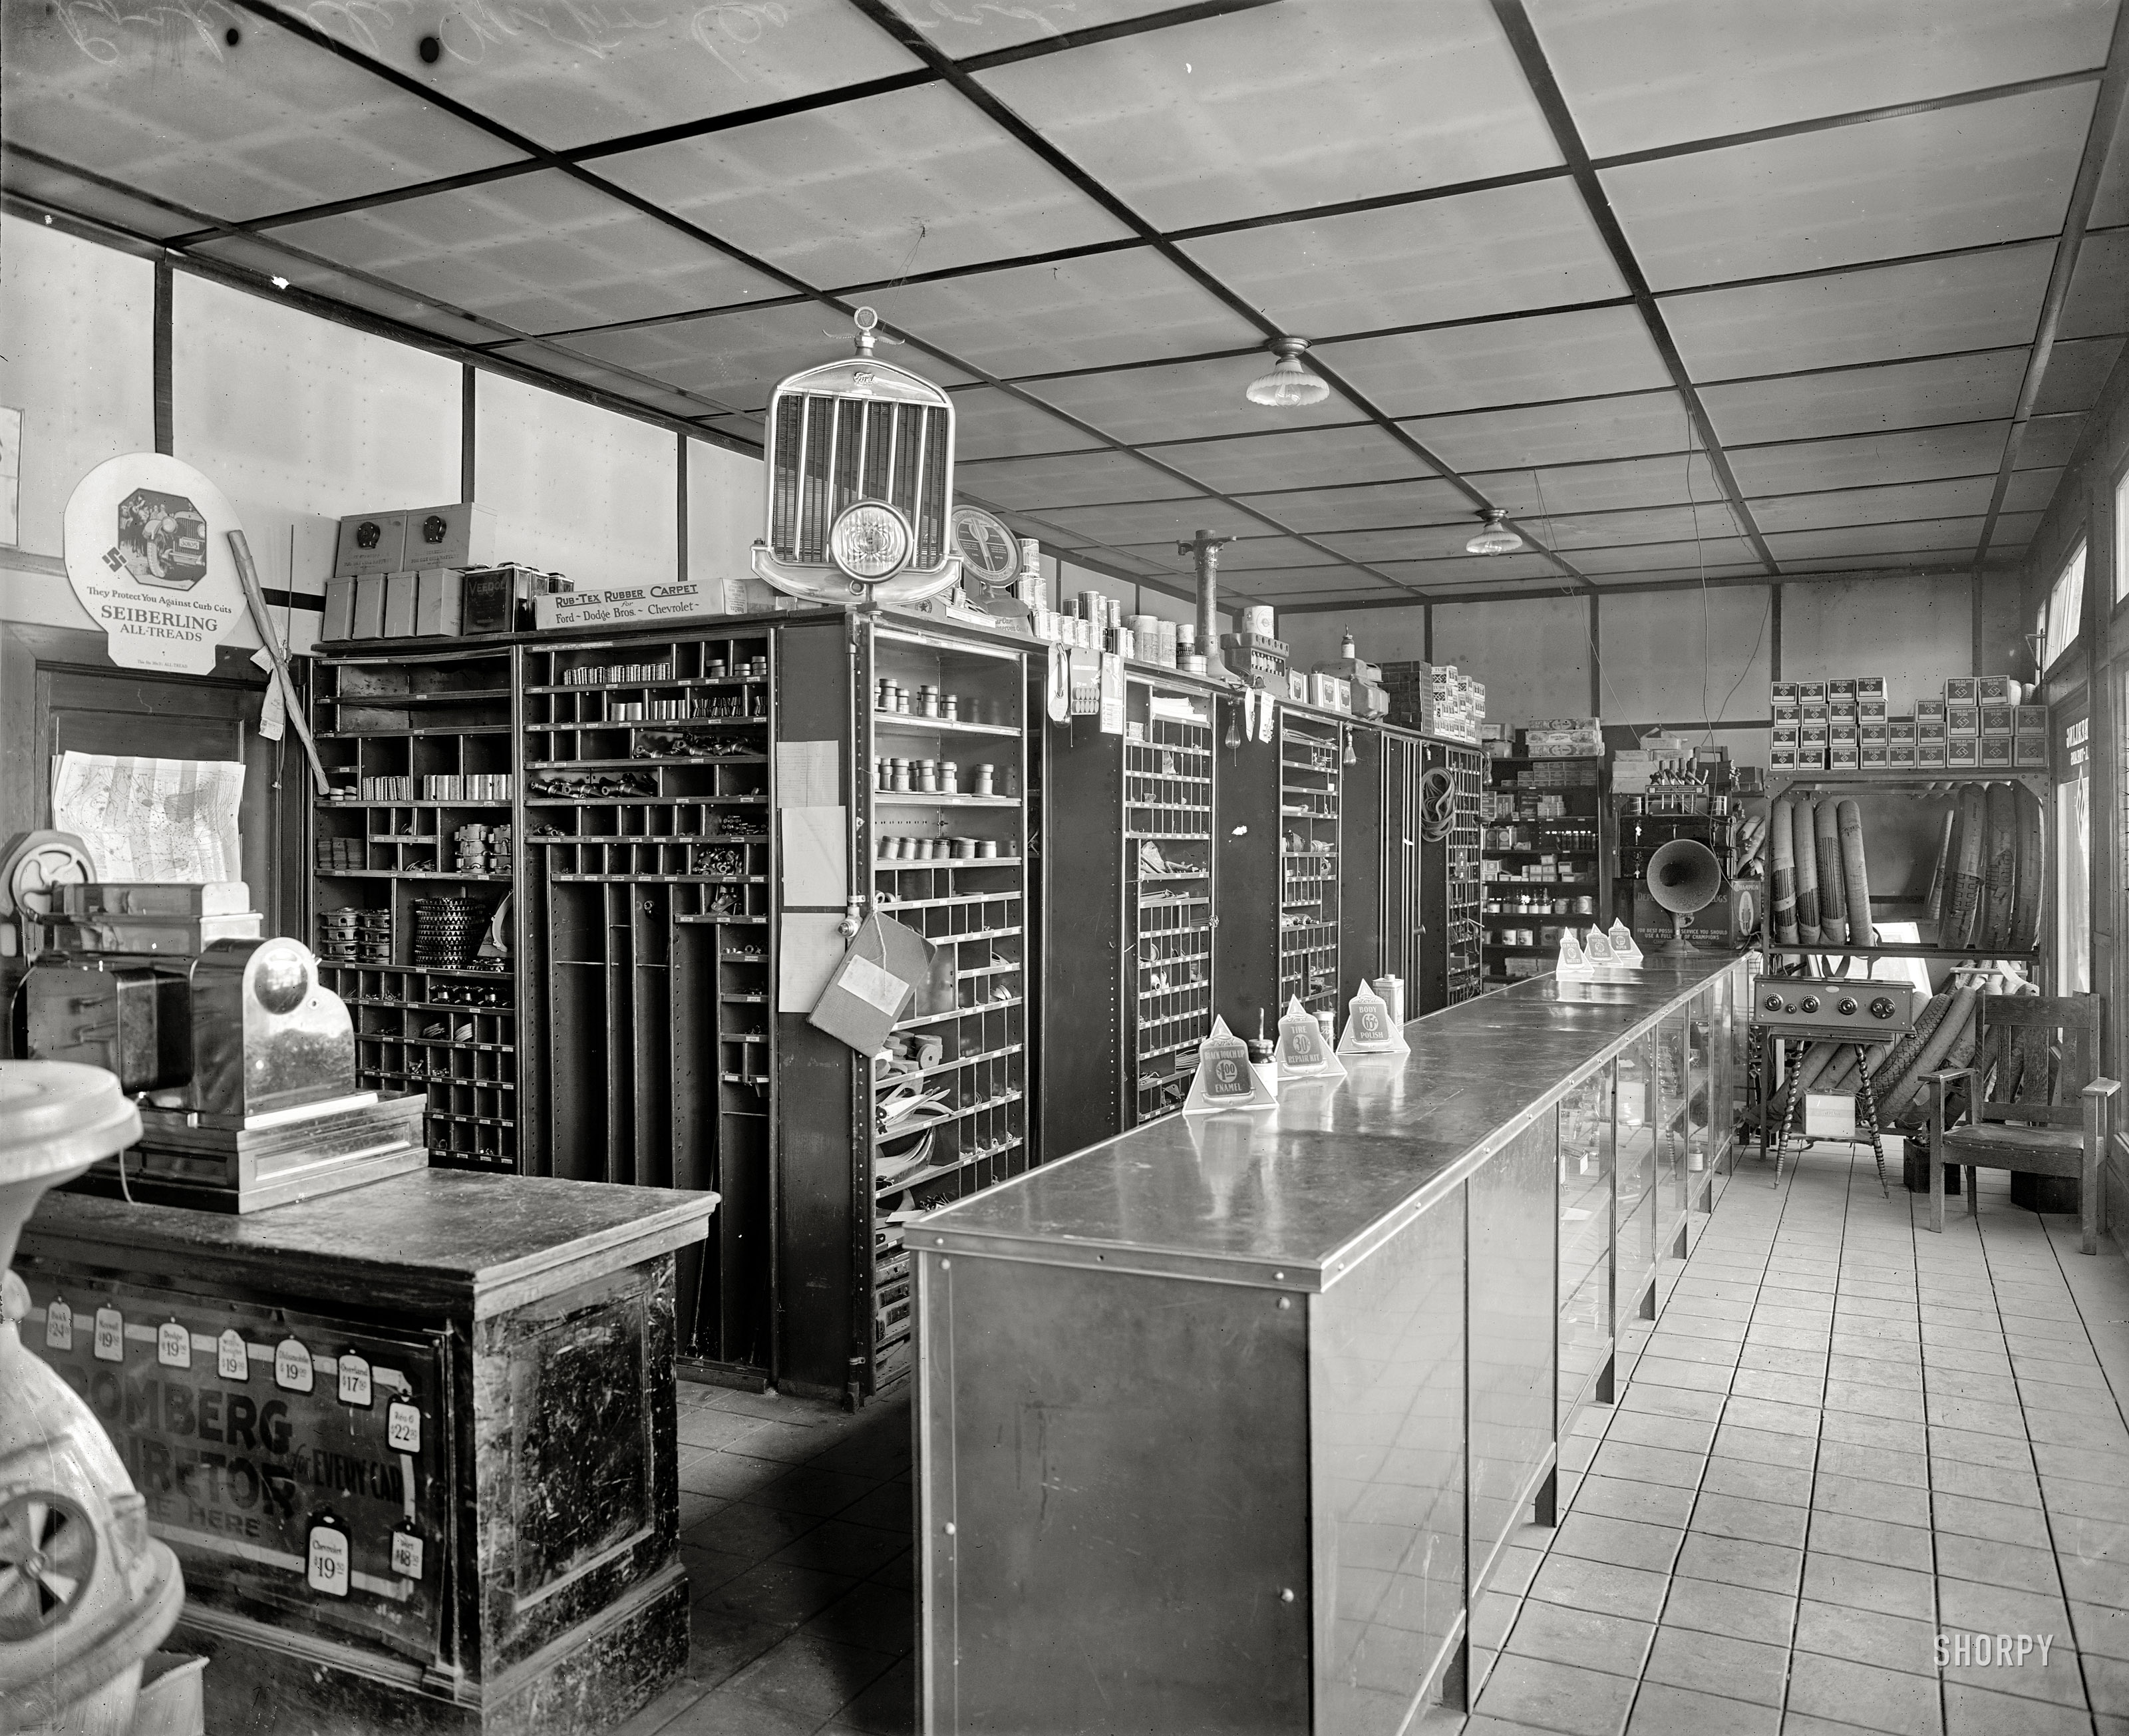 Rockville, Maryland, circa 1925. "Montgomery County Motor Co." (the Chevrolet dealer seen here). National Photo Company glass negative. View full size.